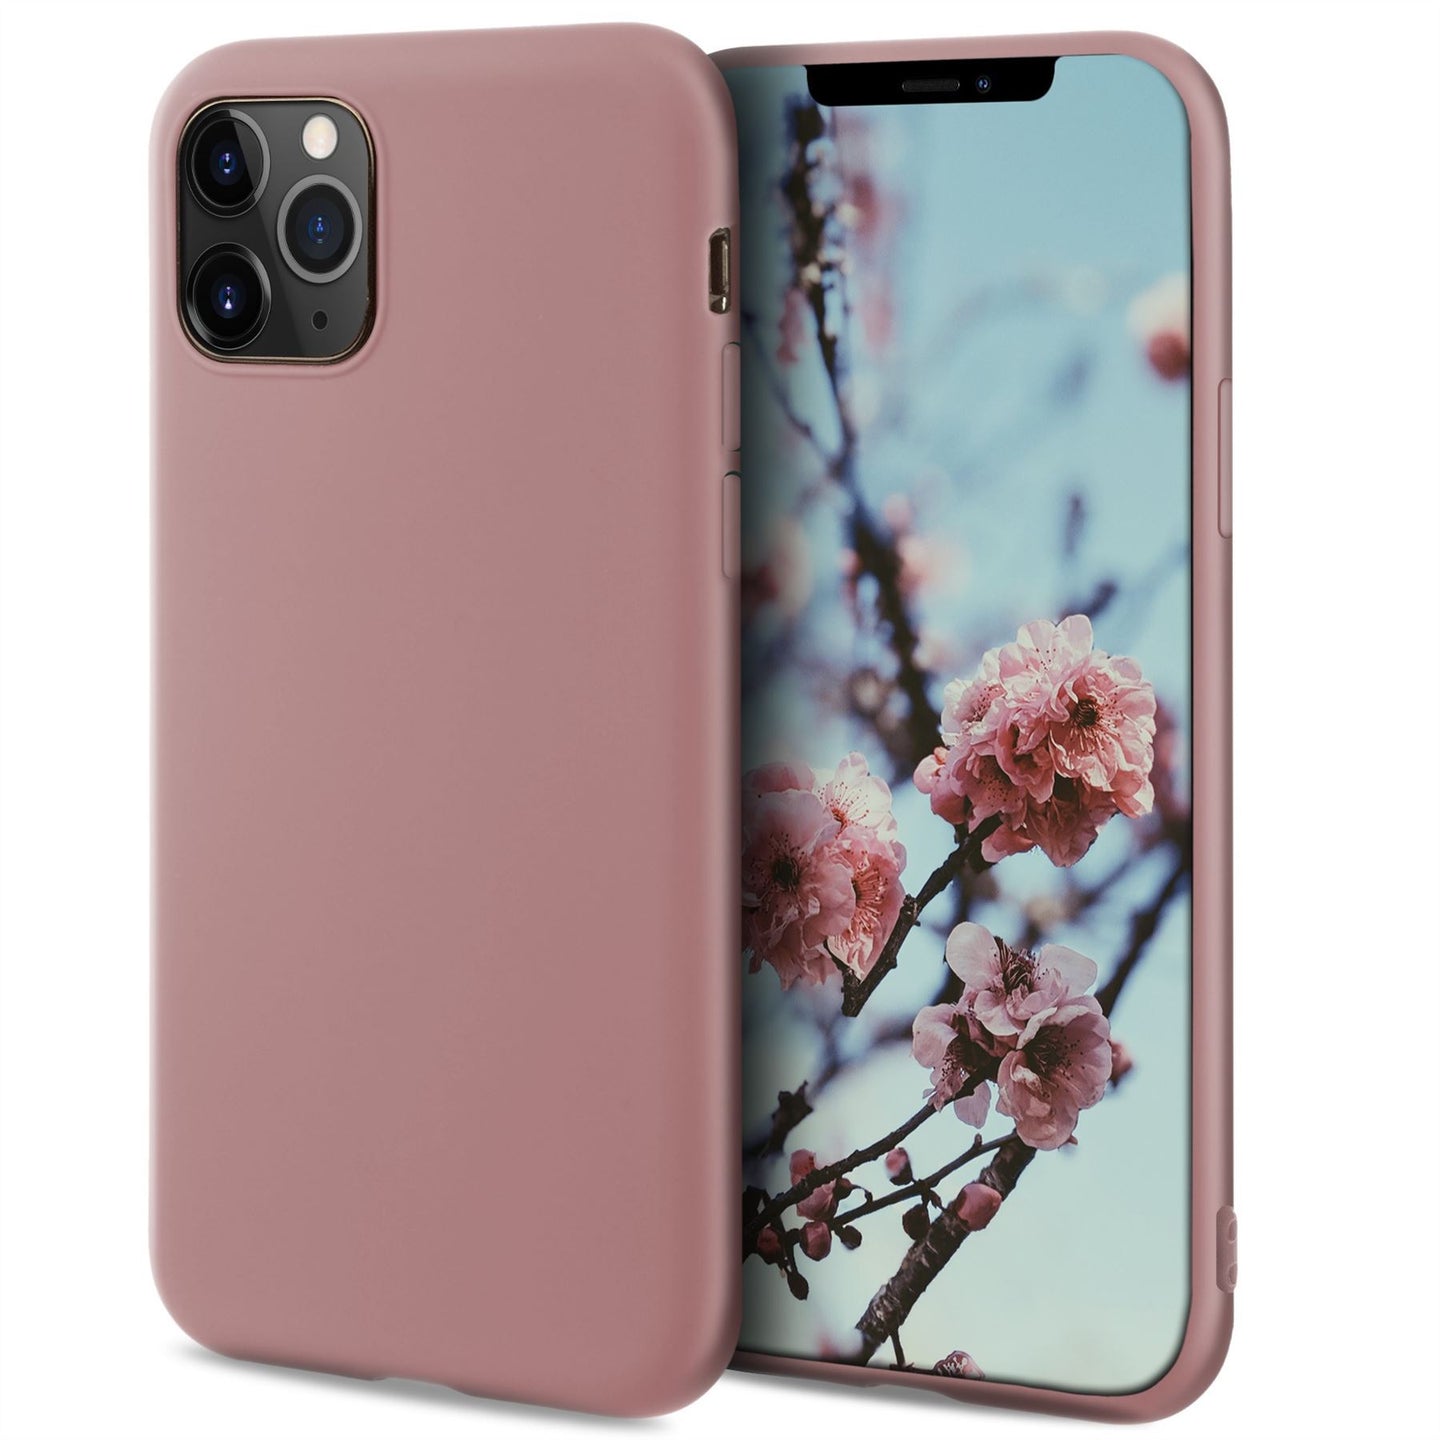 Moozy Minimalist Series Silicone Case for iPhone 11 Pro, Rose Beige - Matte Finish Slim Soft TPU Cover